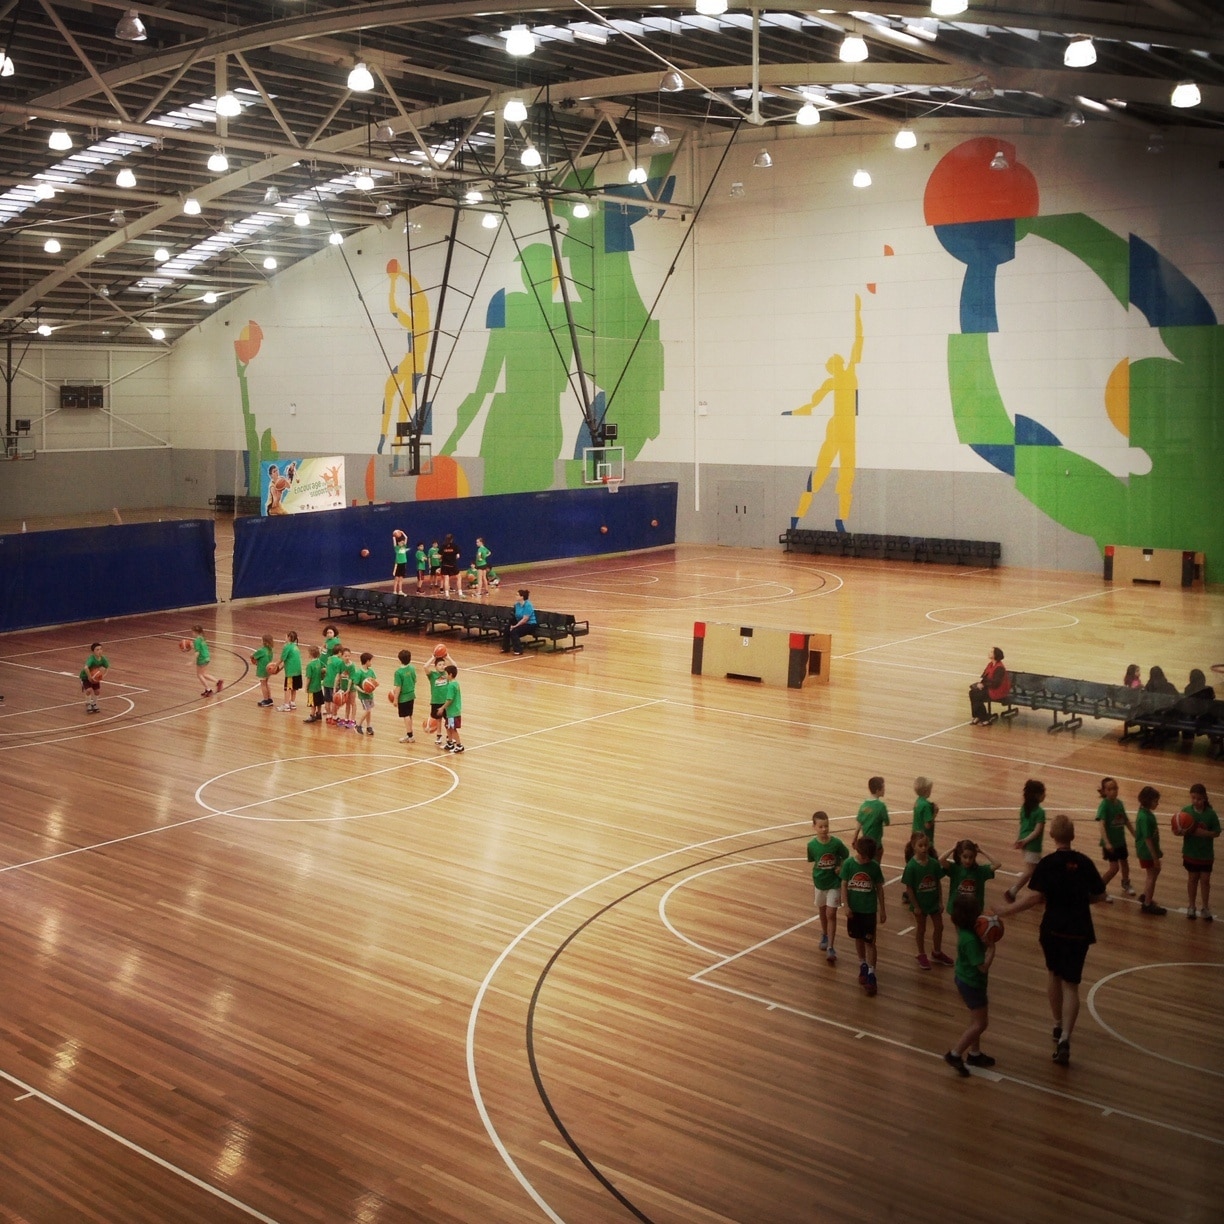 Huge complex in Albert Park. Offering all types of facilities for any type of sports. The gymnasium/courts are huge.